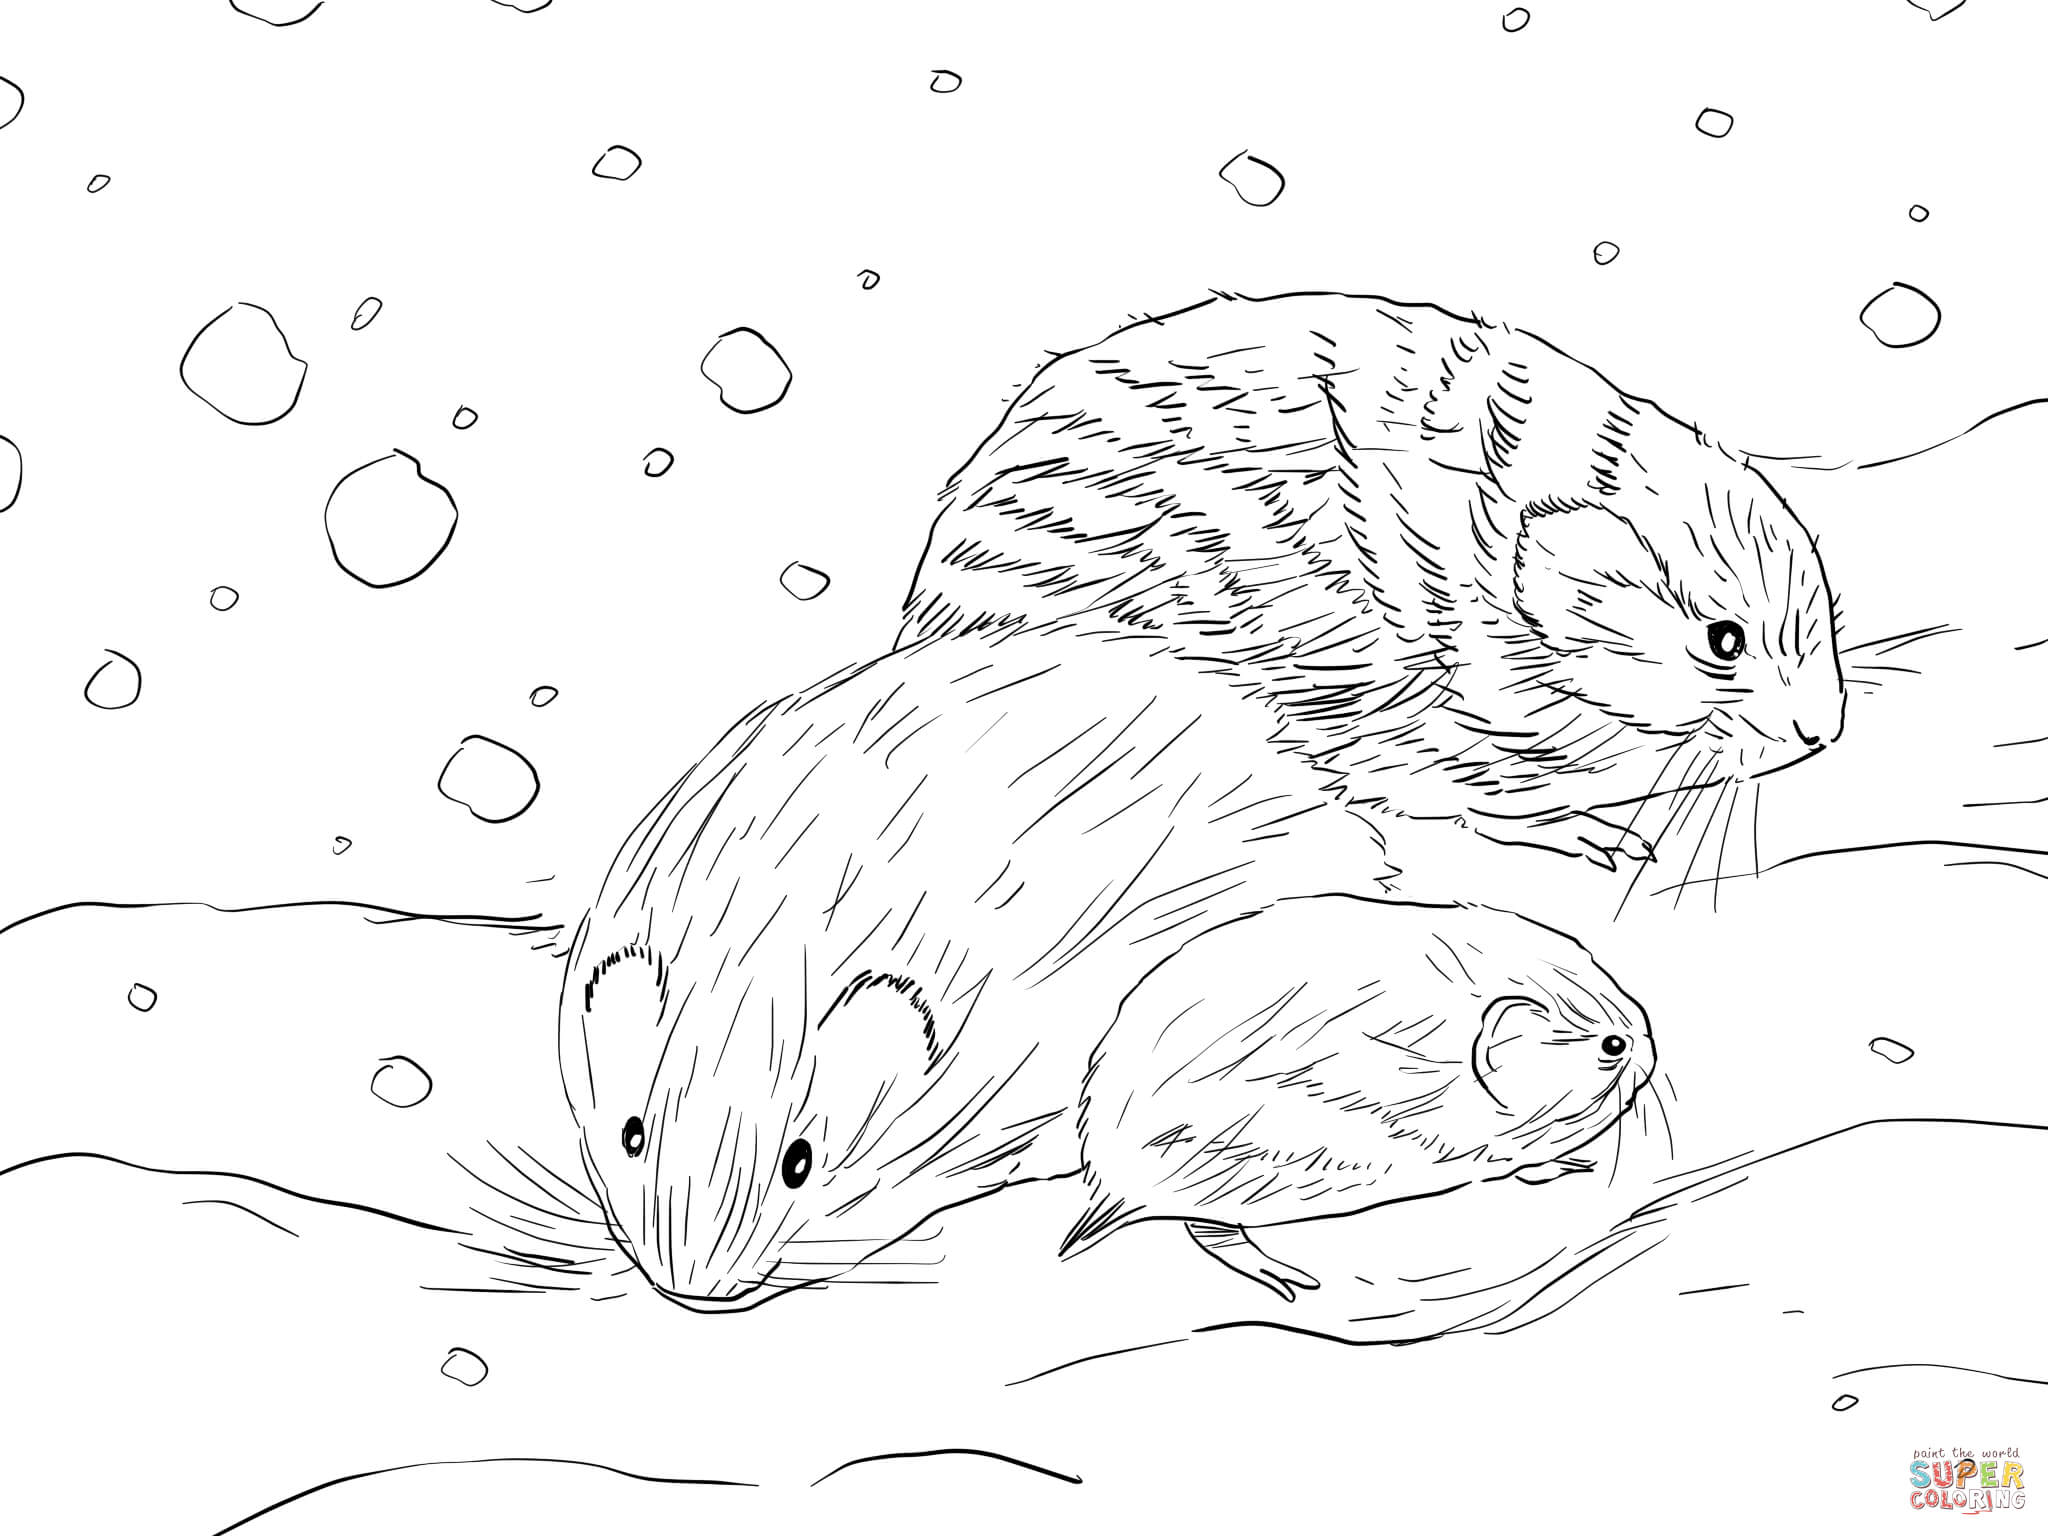 Northern Collared Lemming coloring page | Free Printable Coloring Pages